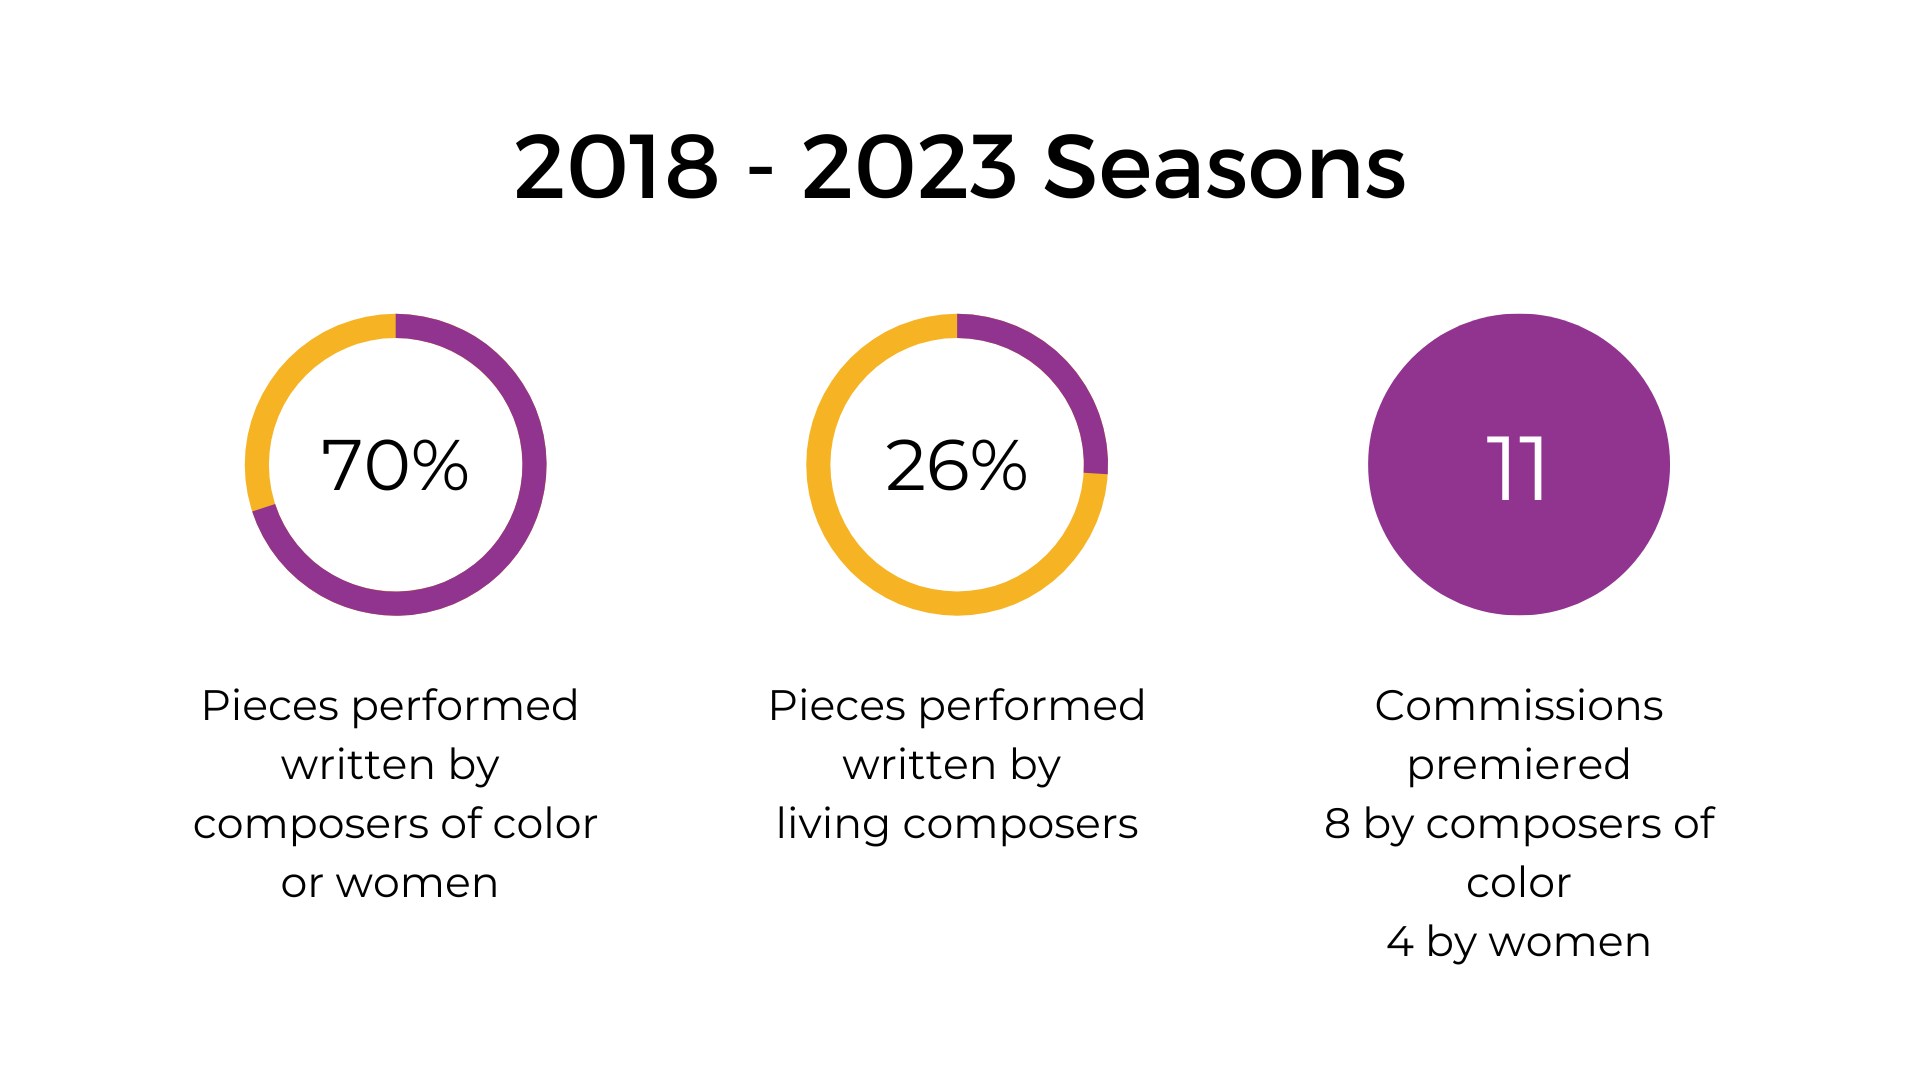 2018-2023 Seasons. 70% pieces performed written by composers of color or women. 26% of pieces performed written by living composers. 11 commissions premiered, 8 by composers of color, 4 by women.